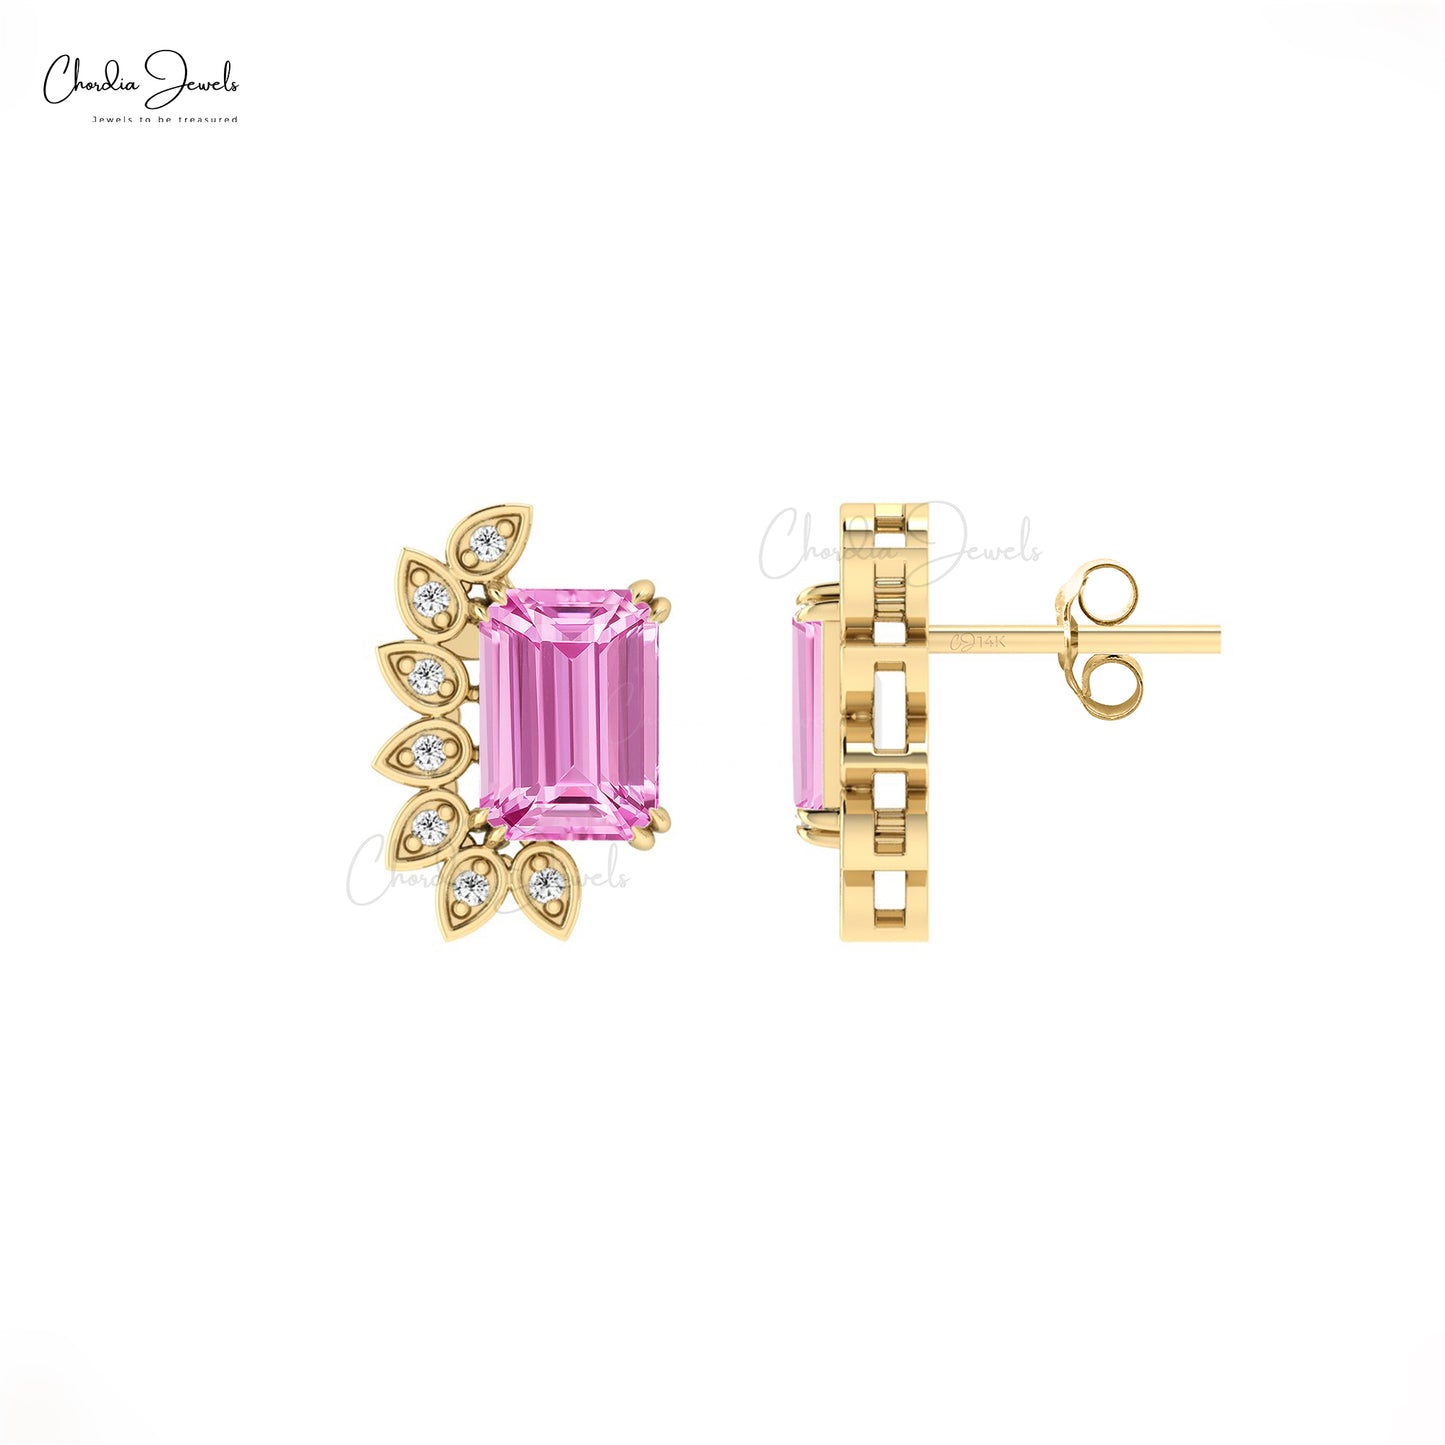 Statement Earrings With Pink Sapphire Gemstone 14k Solid Gold Diamond Push Back Earring For Gift